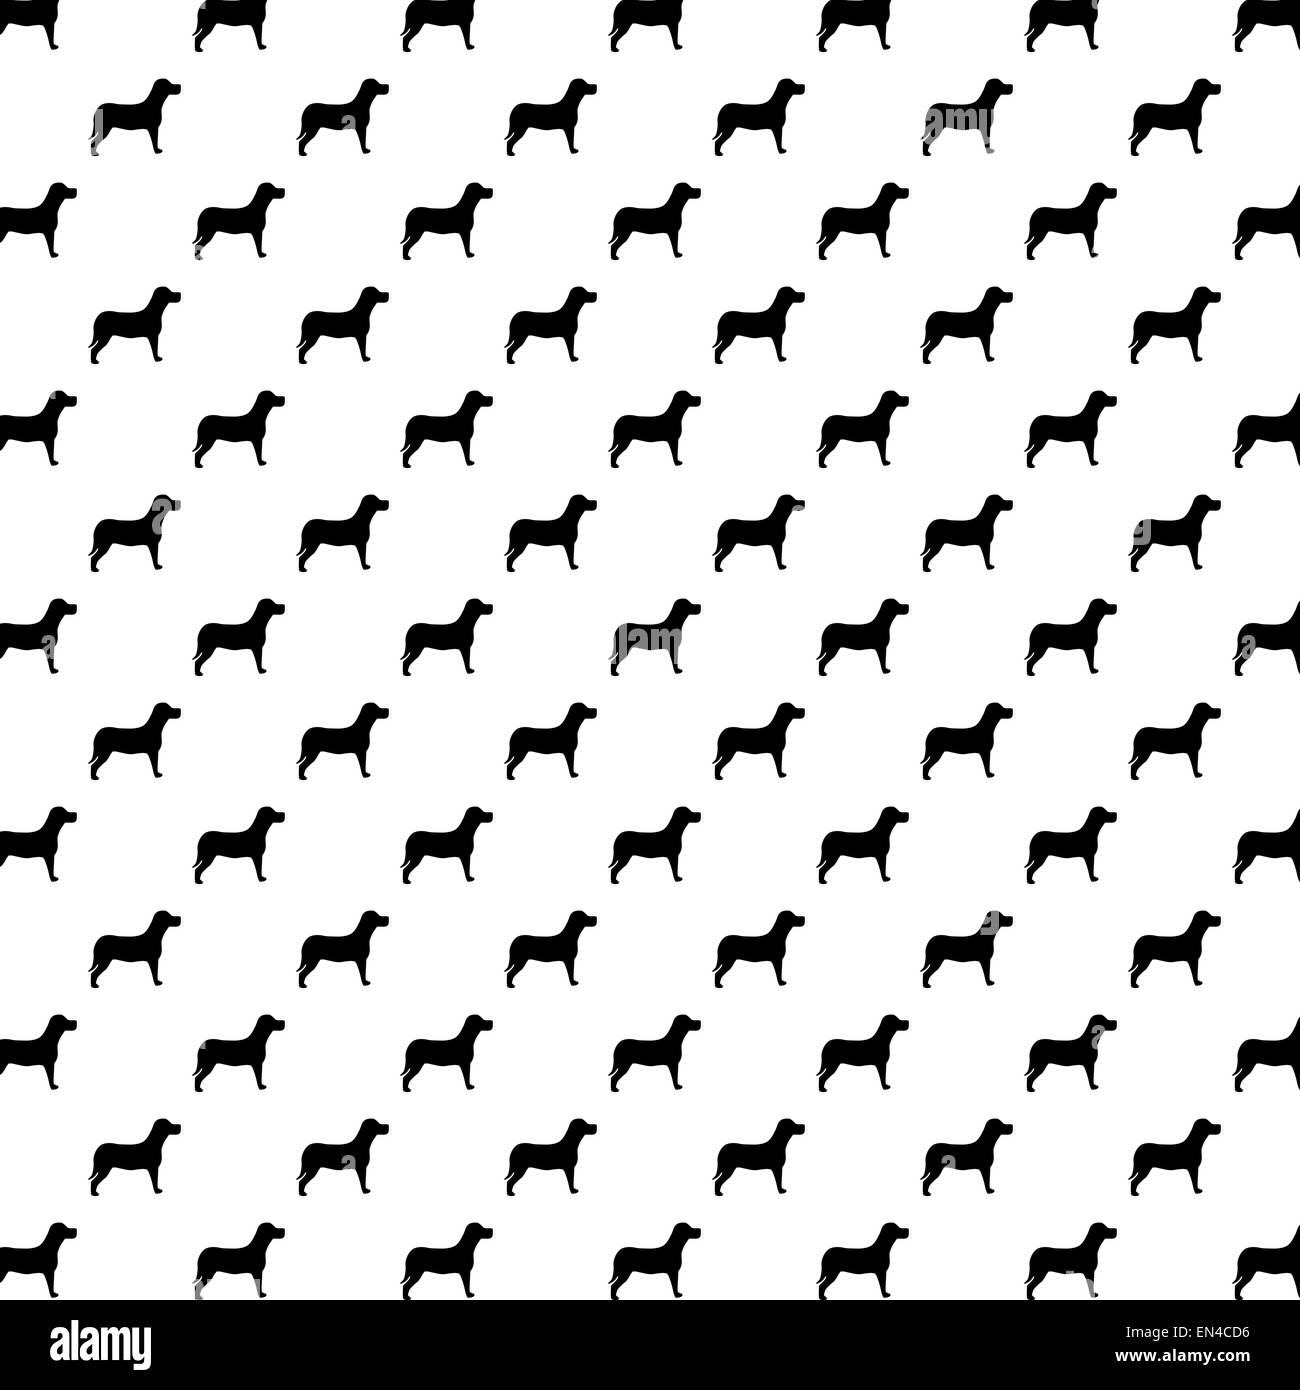 Black And White Dogs Dog Polka Dots Background Pattern Texture